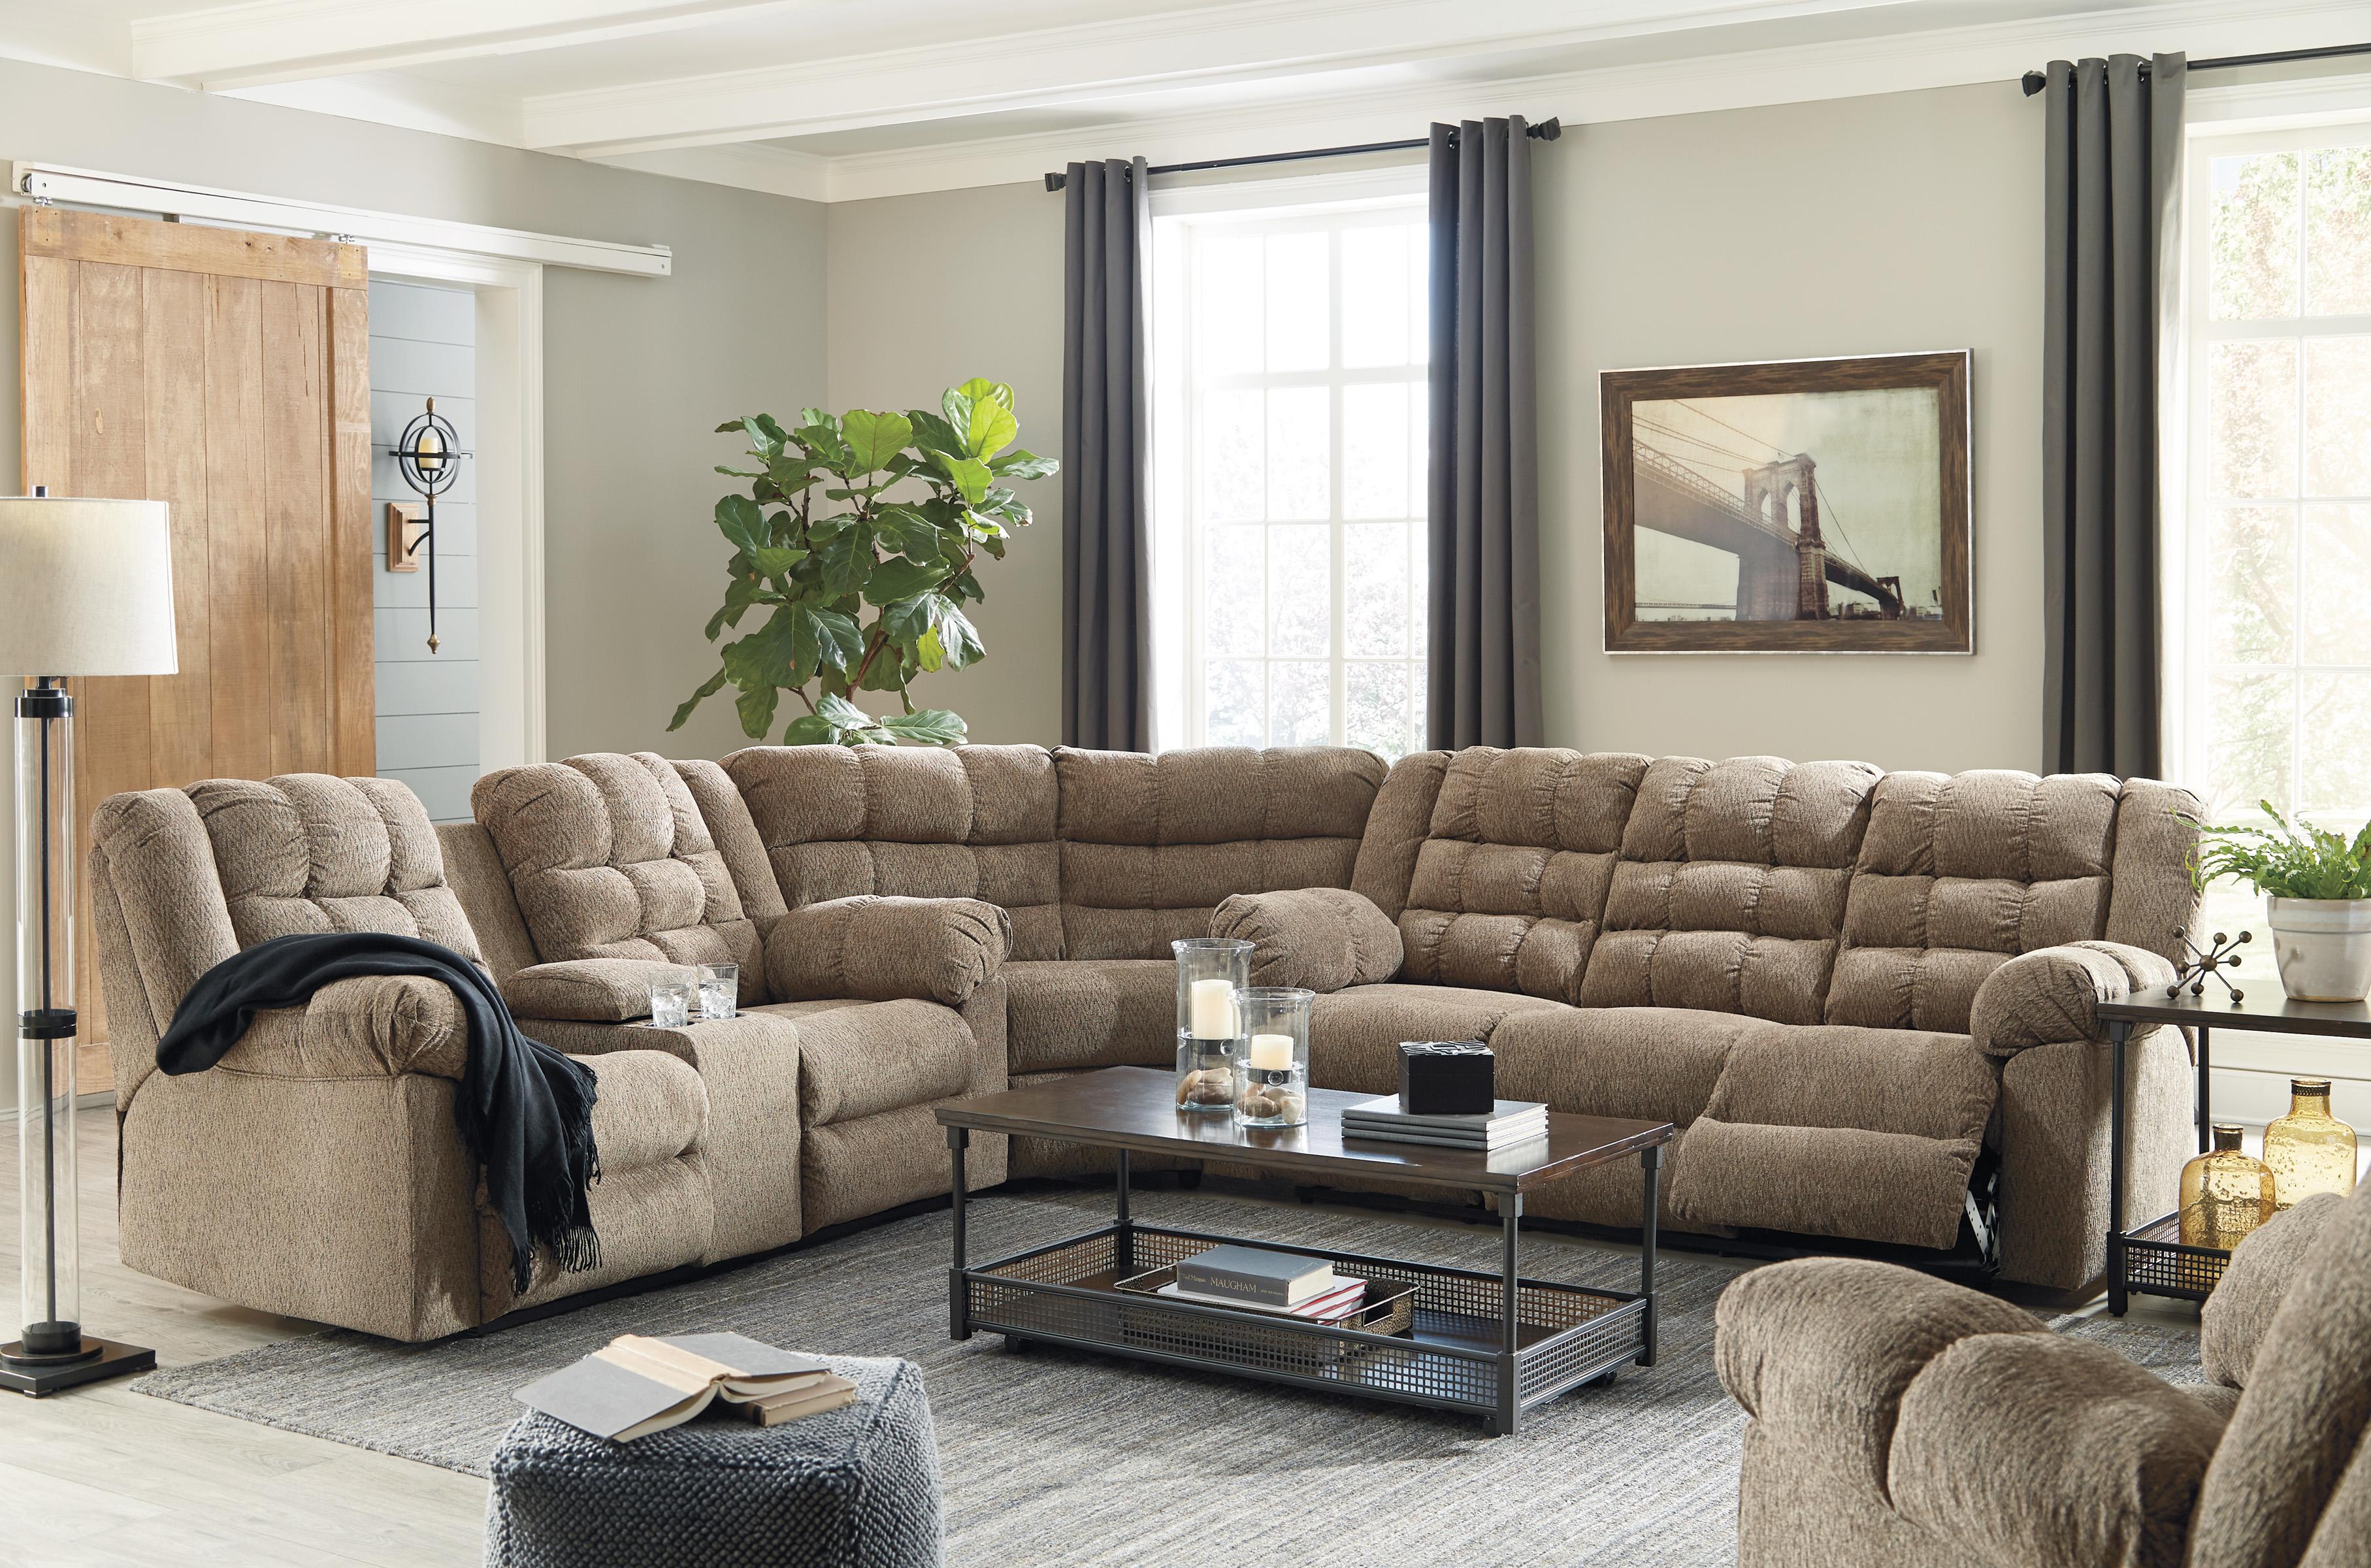 

    
Ashley Workhorse 58401 Sectional Set 4pcs in Cocoa
